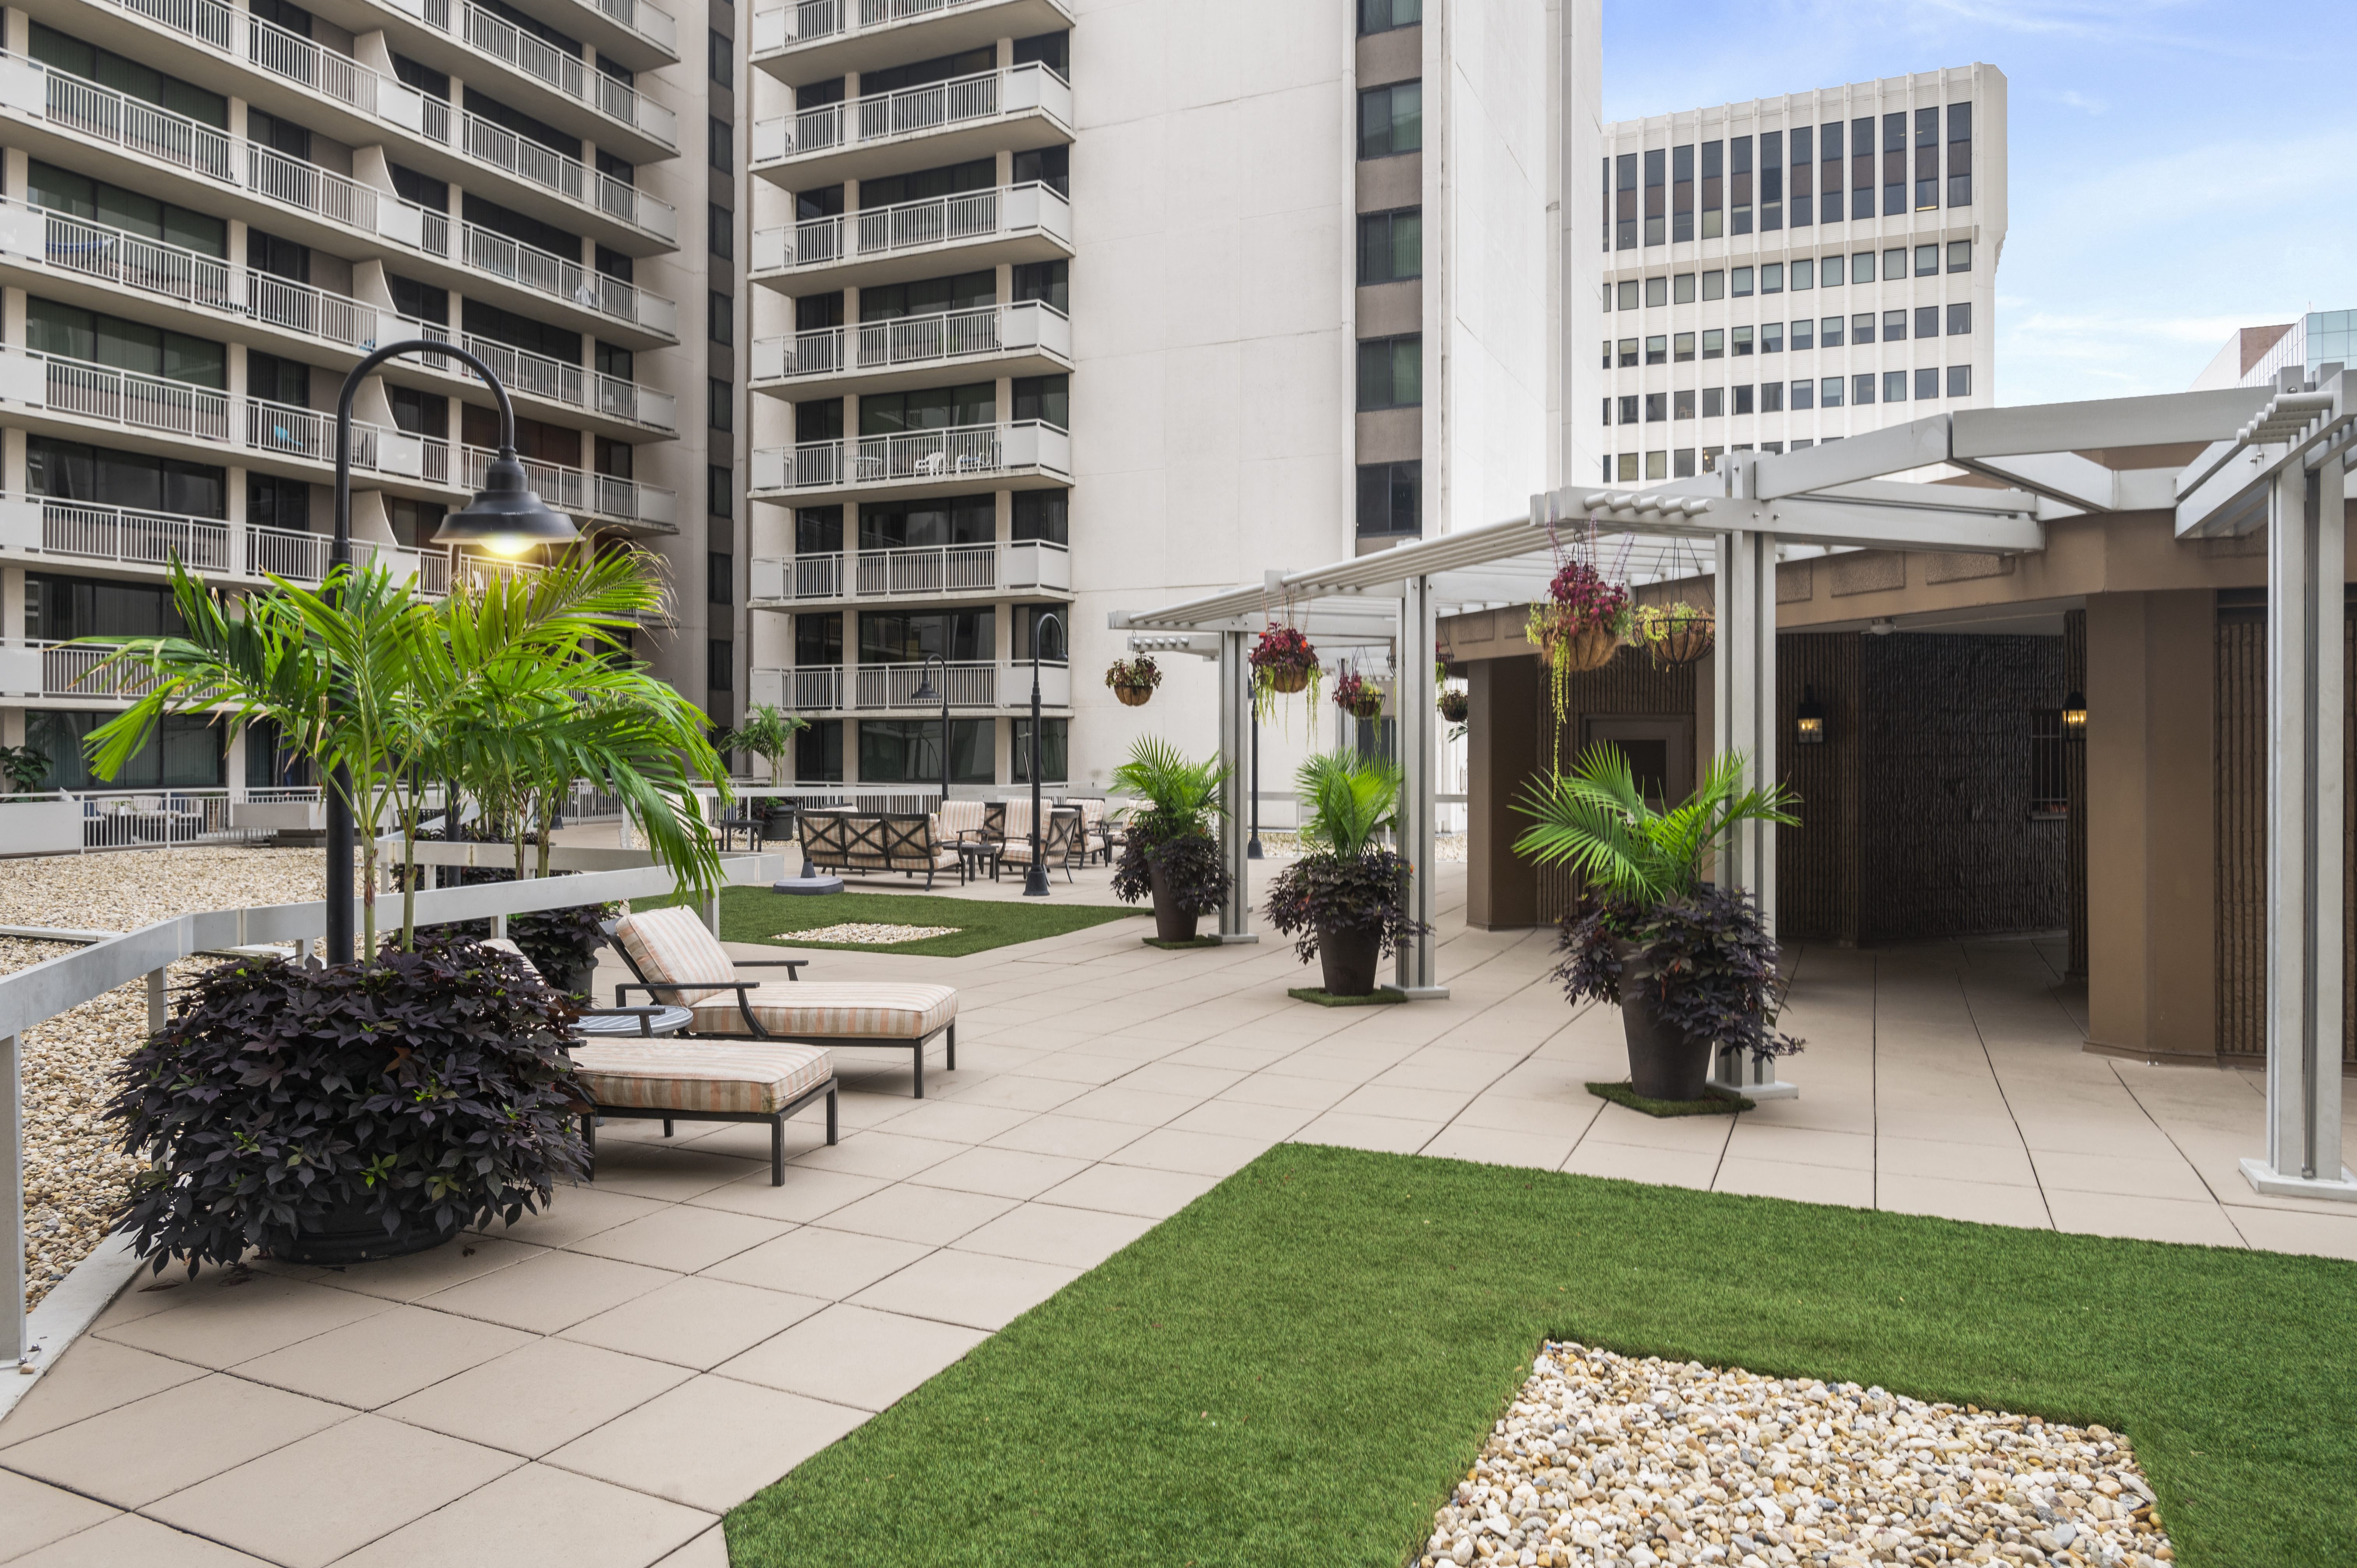 Beautifully Landscaped Courtyard with Gas Grills